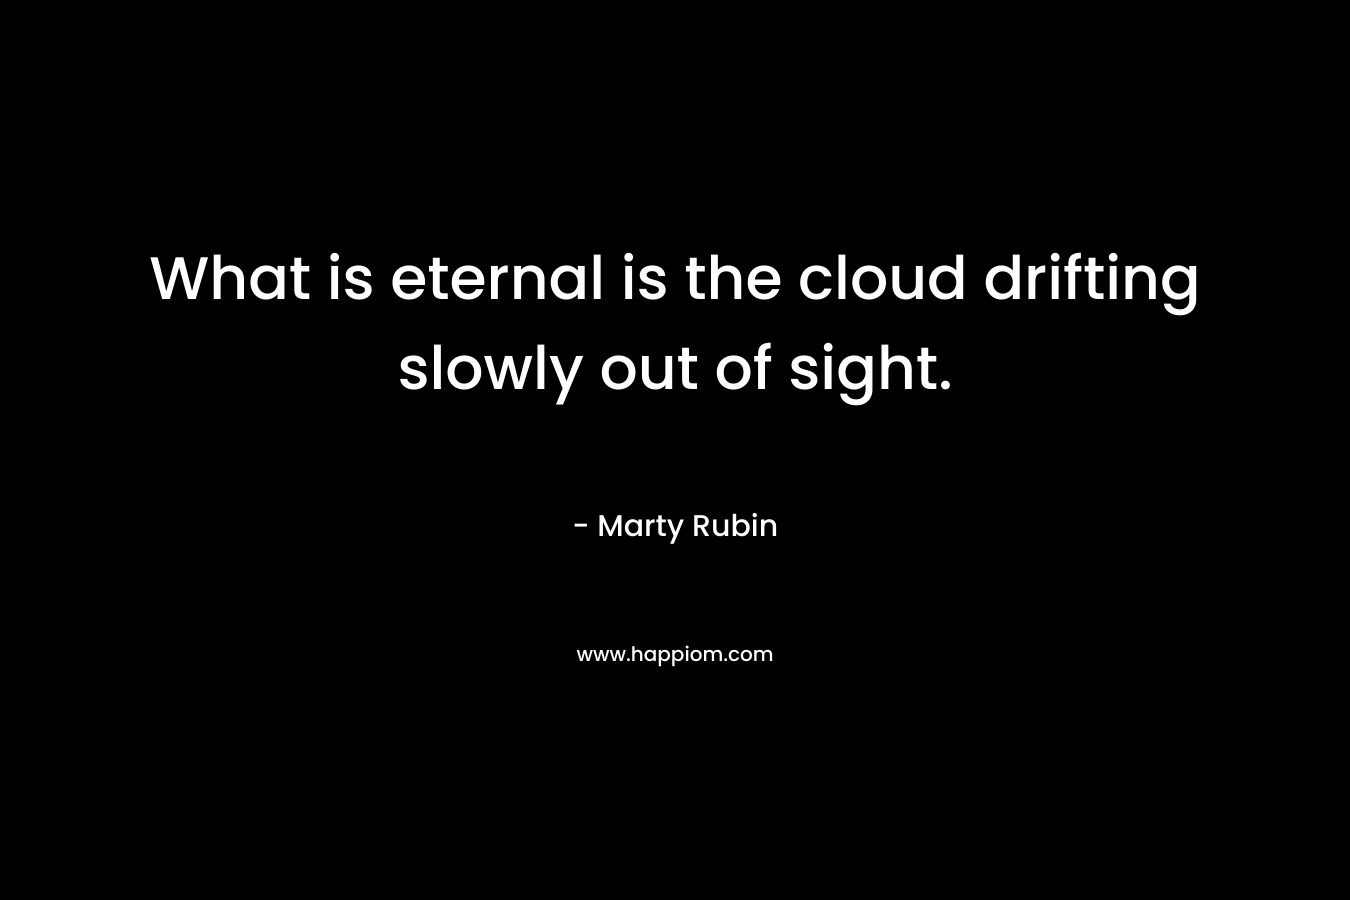 What is eternal is the cloud drifting slowly out of sight.